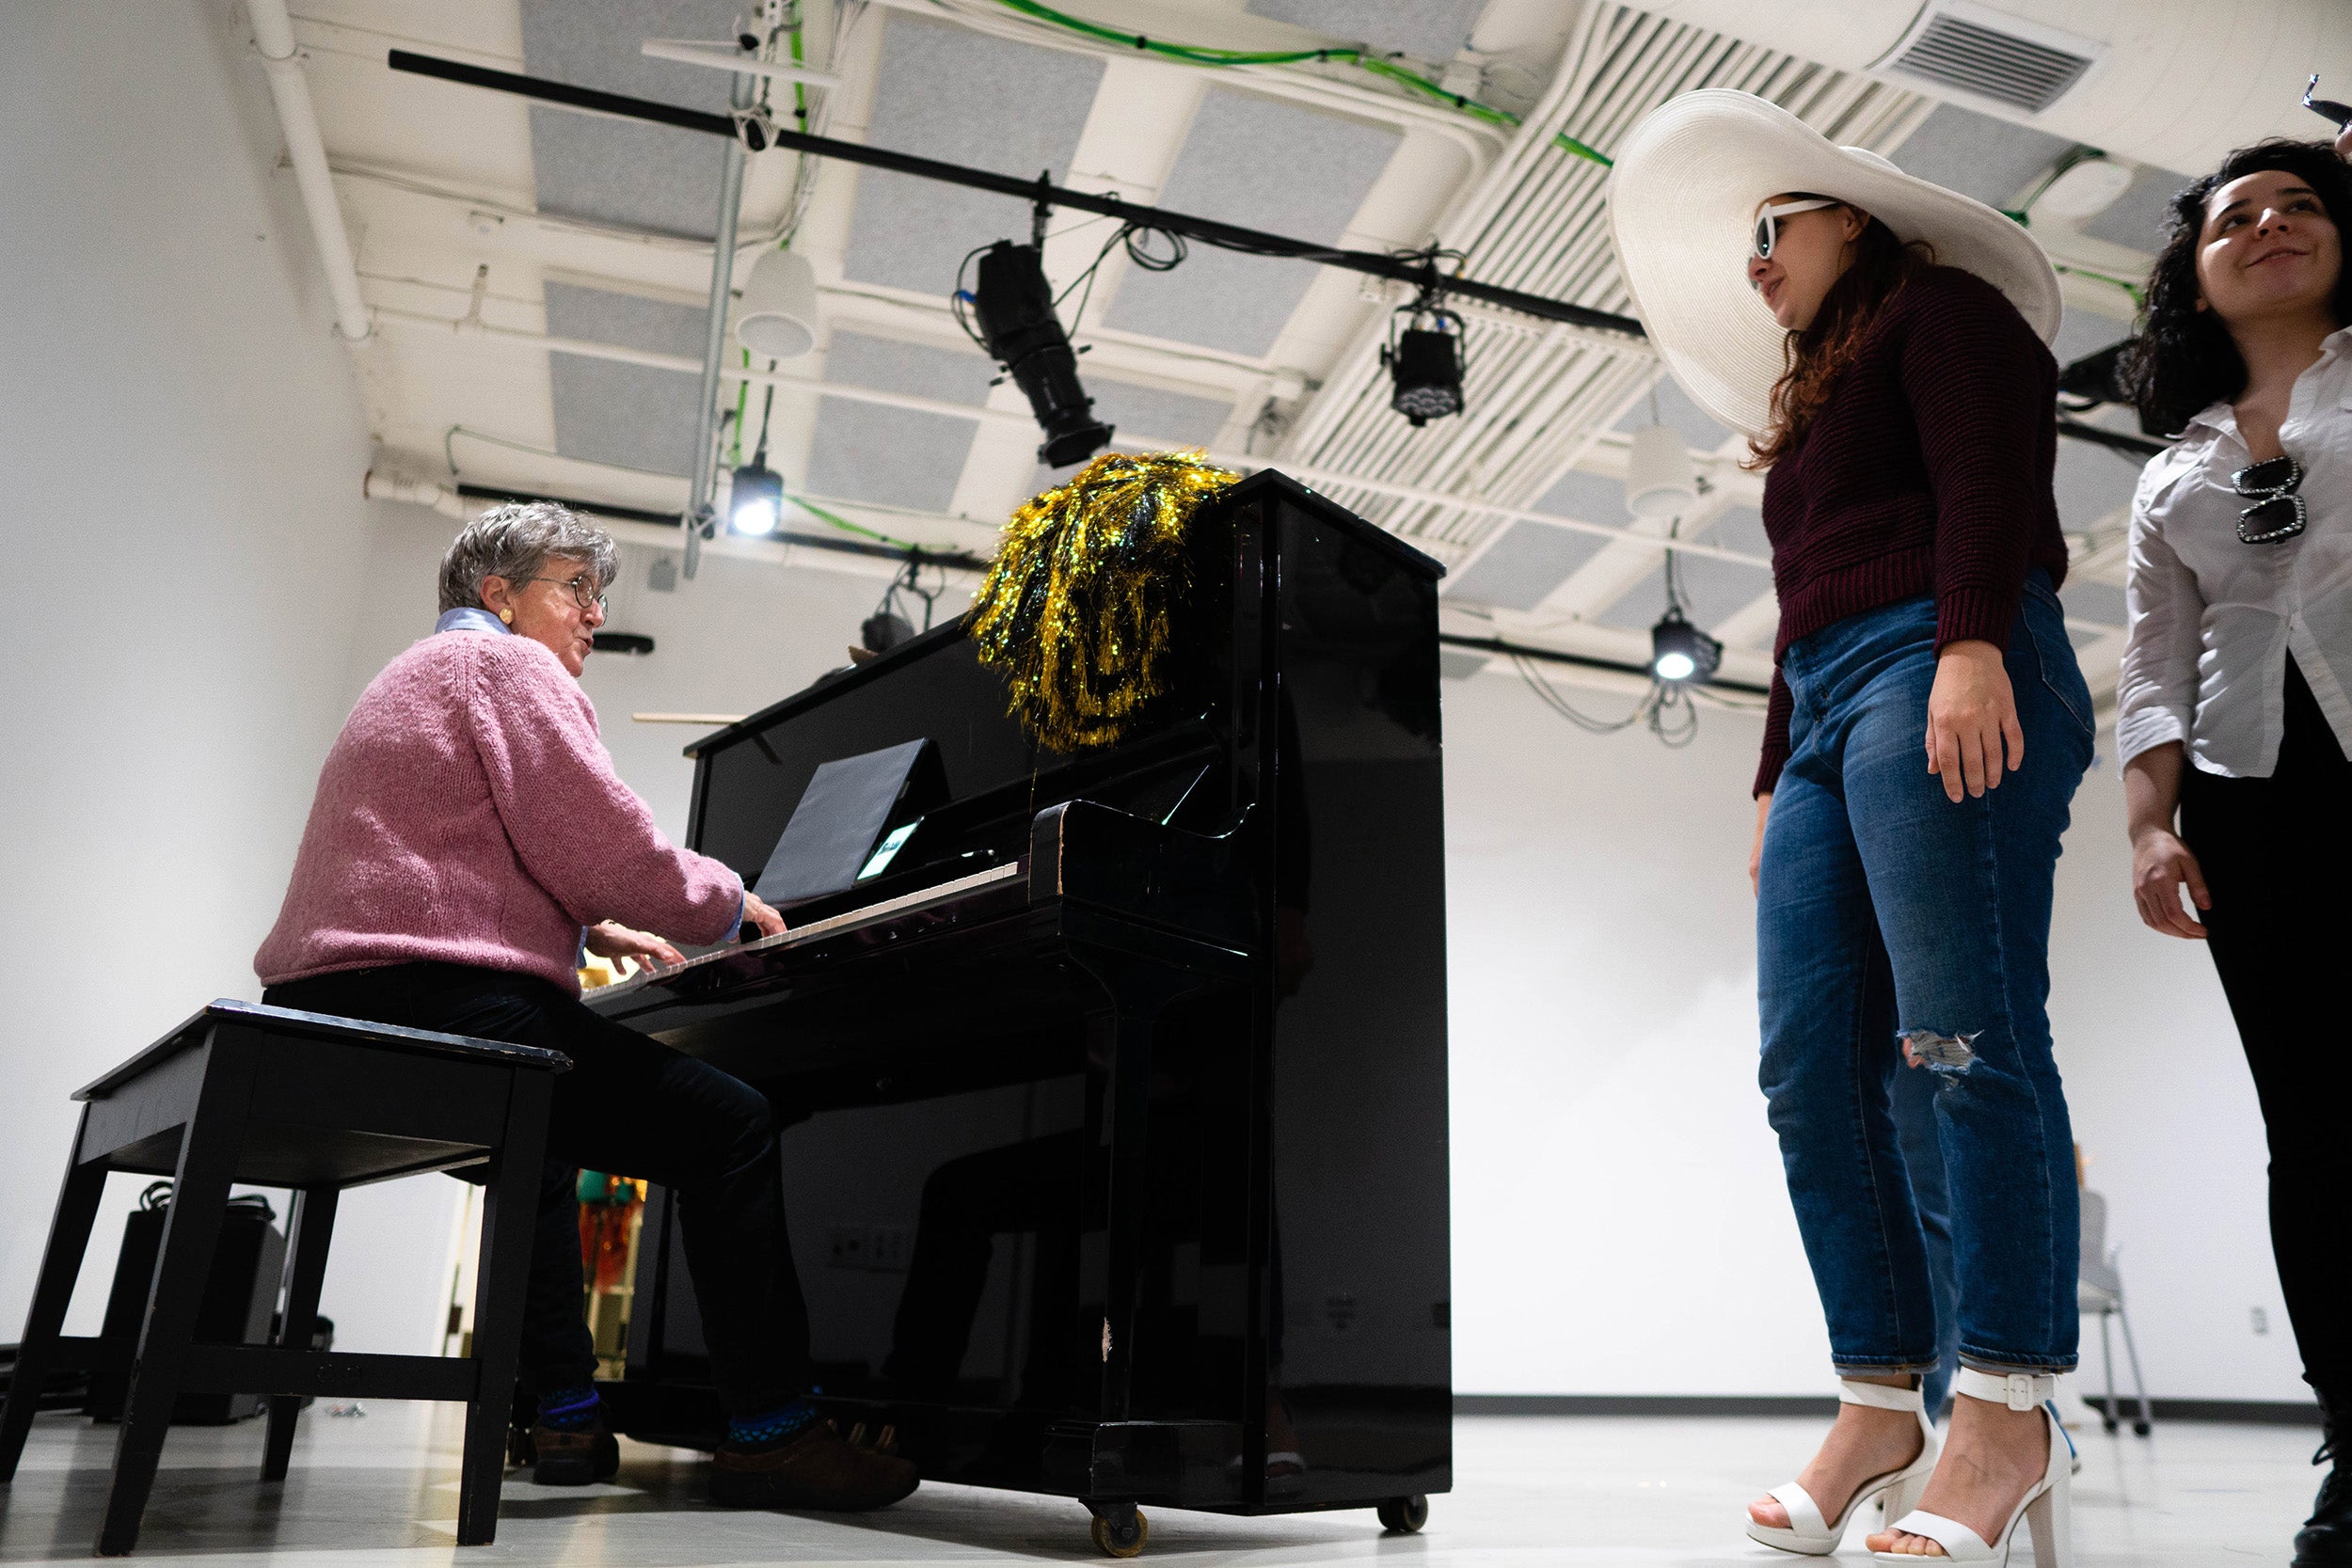 Musical director Catherine Stornetta plays piano and runs performers through vocal warm-ups before rehearsal.